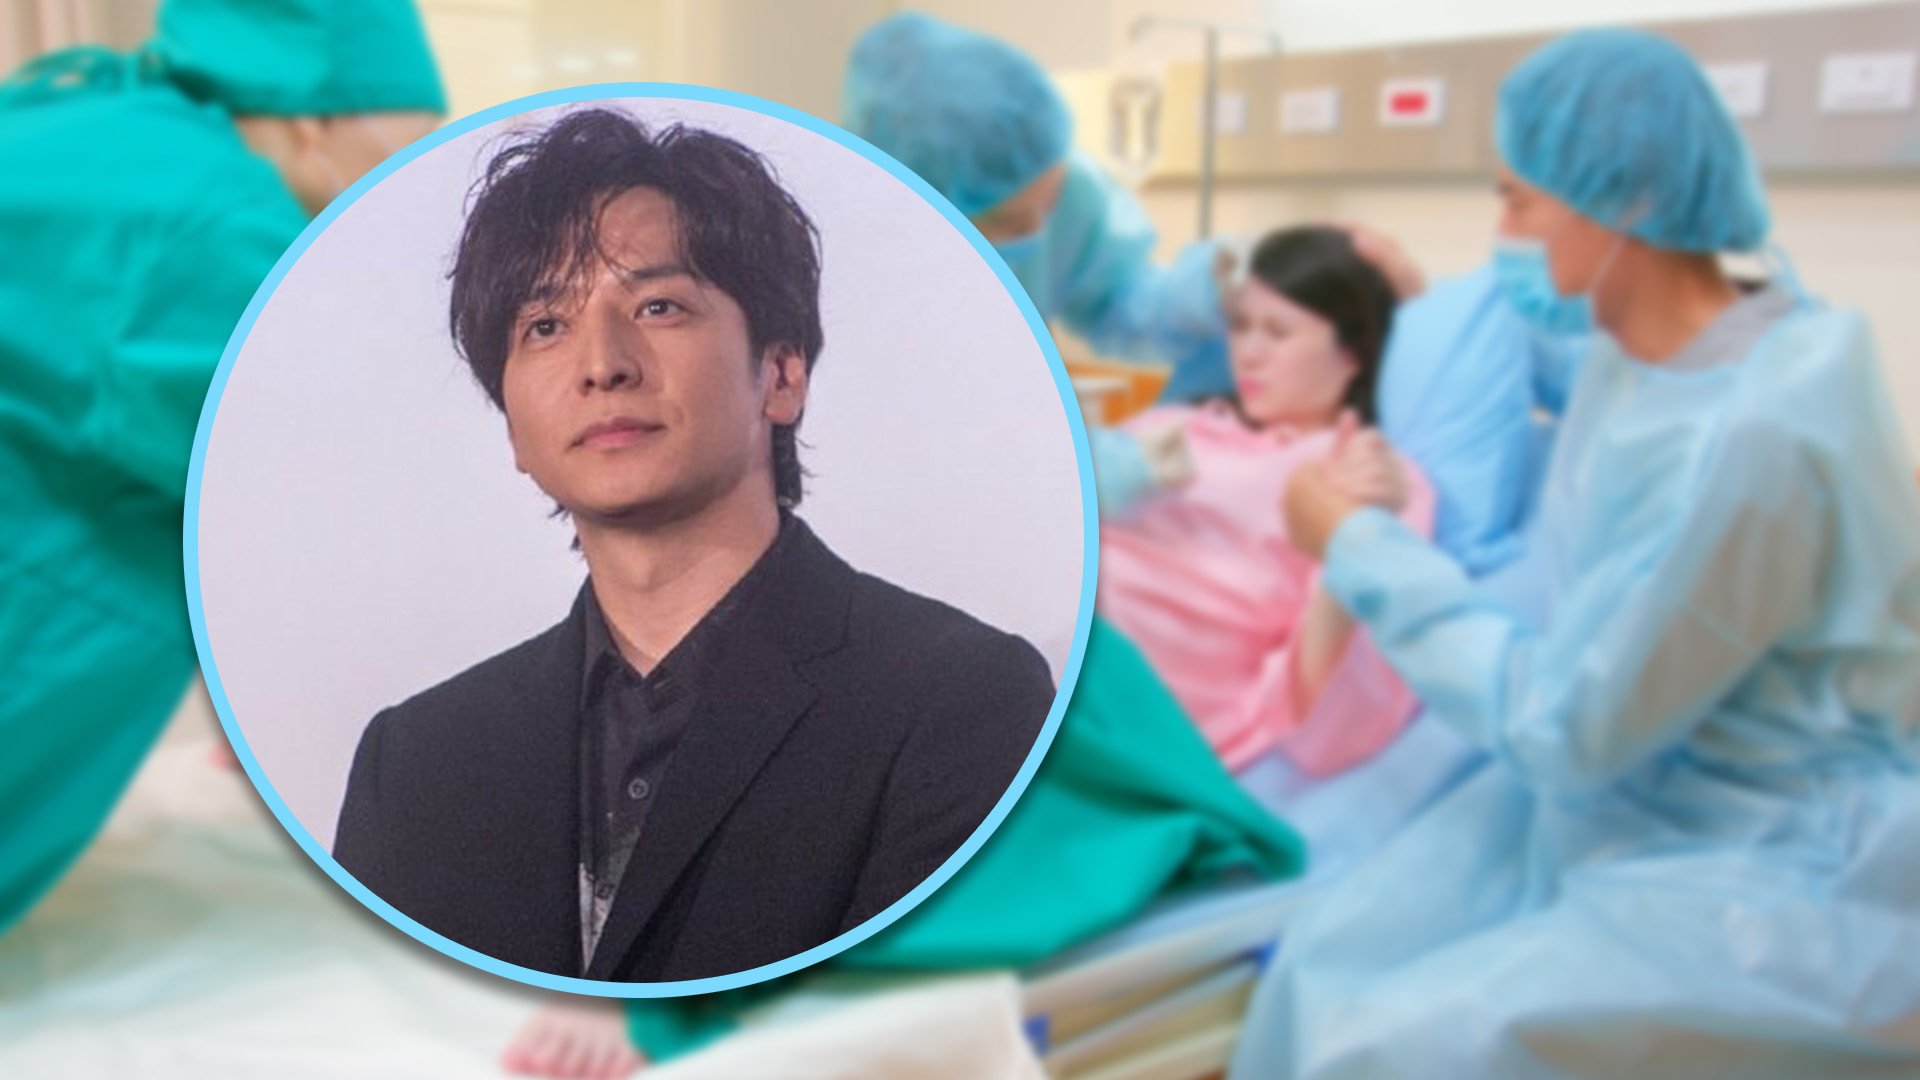 A famous Japanese actor has been slammed online for offering “male chauvinist” advice to a woman fan who is heavily pregnant. Photo: SCMP composite/Shutterstock/Weibo